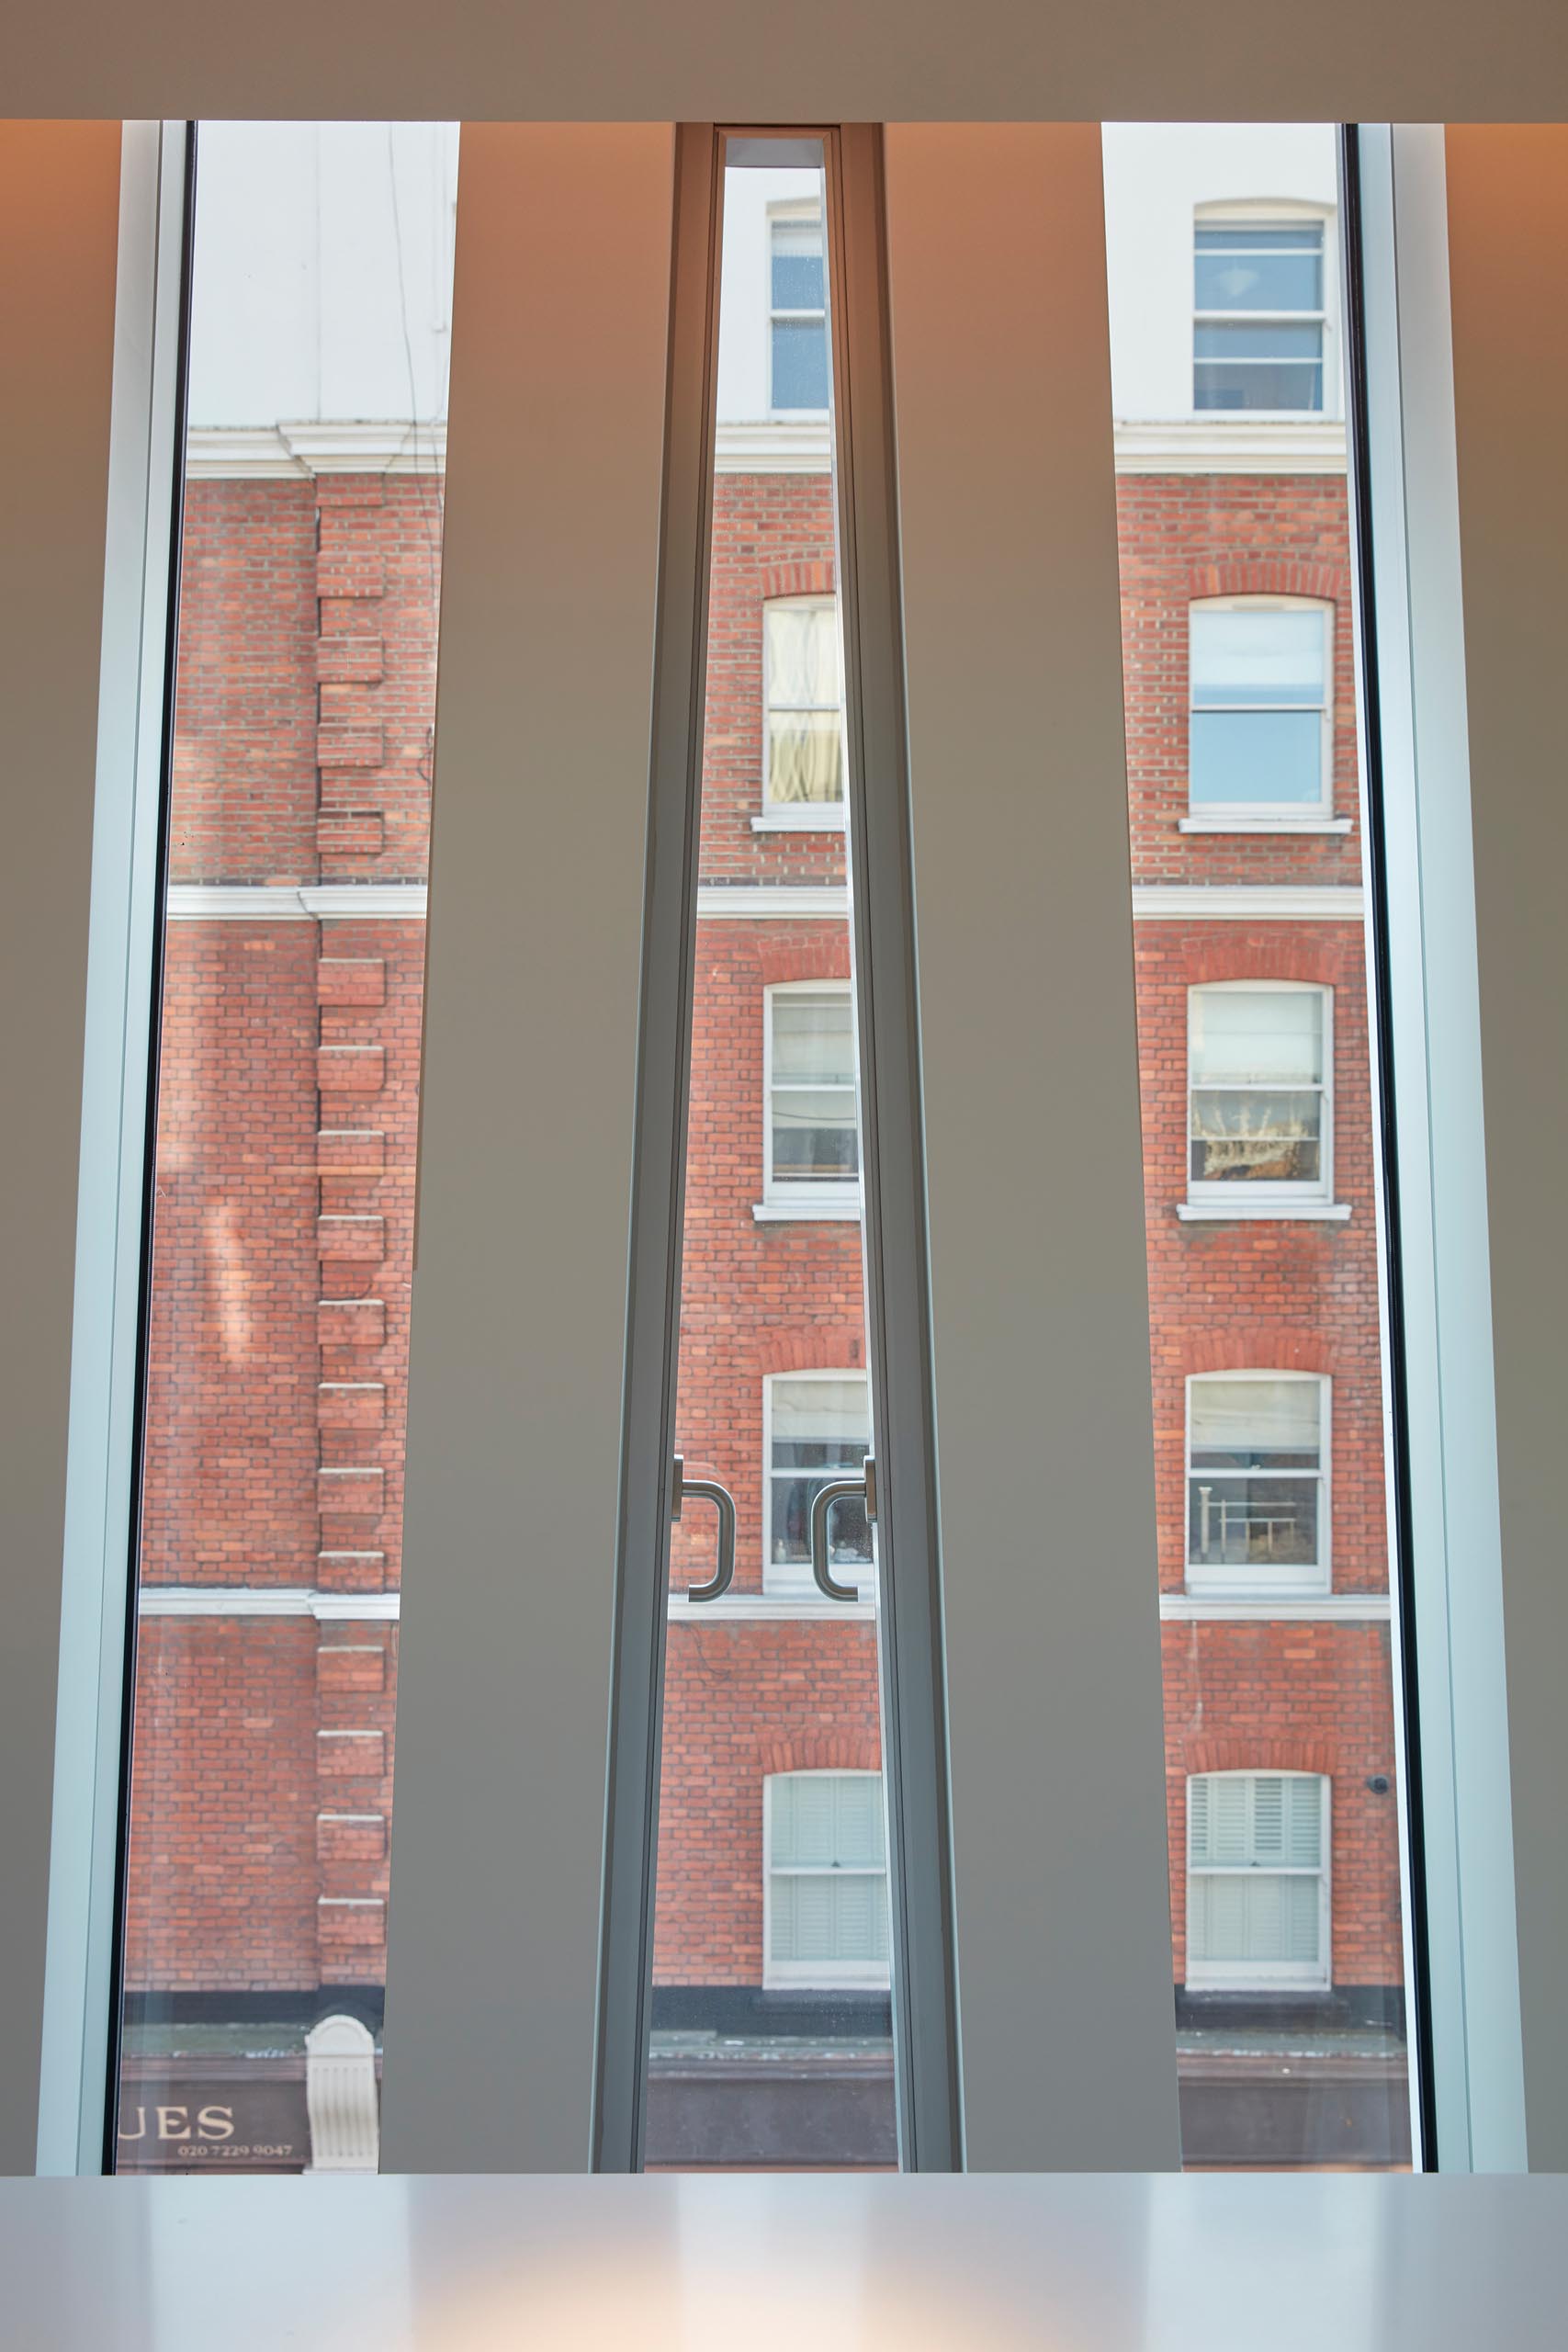 Uniquely shaped windows showcase the lines on the exterior.